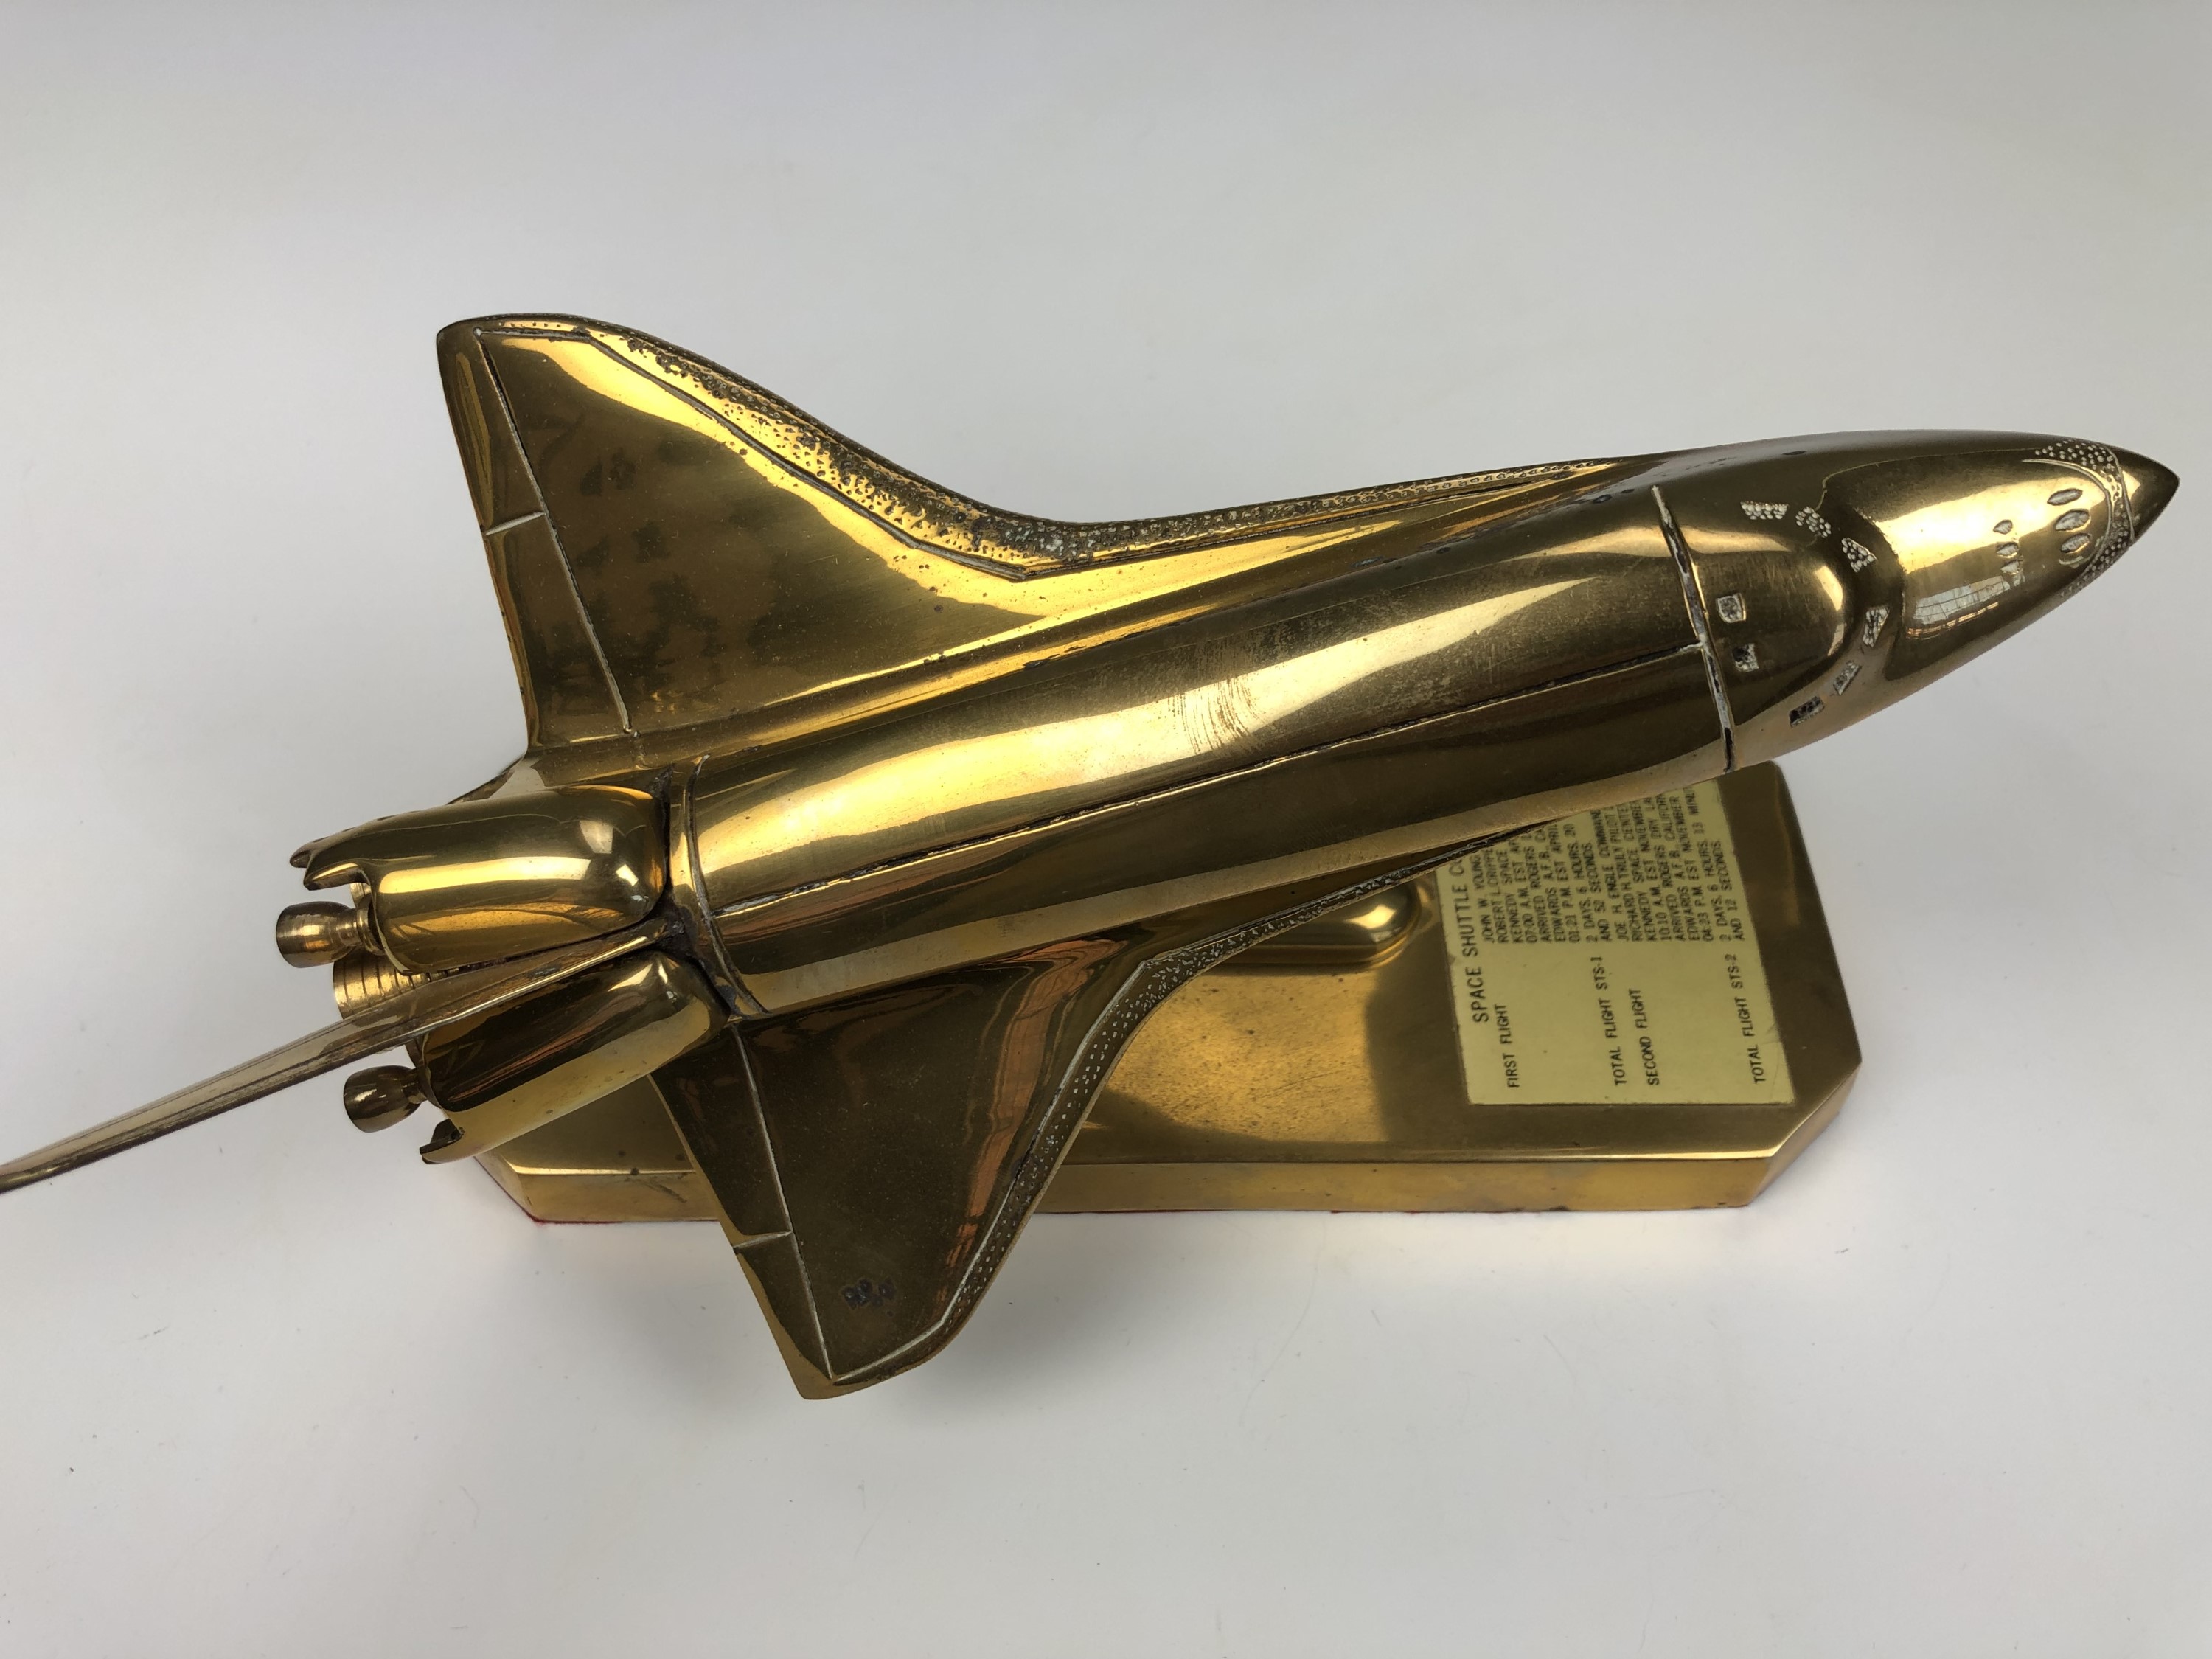 A brass desk model of the Space Shuttle Columbia, 24 cm x 10 cm x 17 cm high - Image 3 of 4